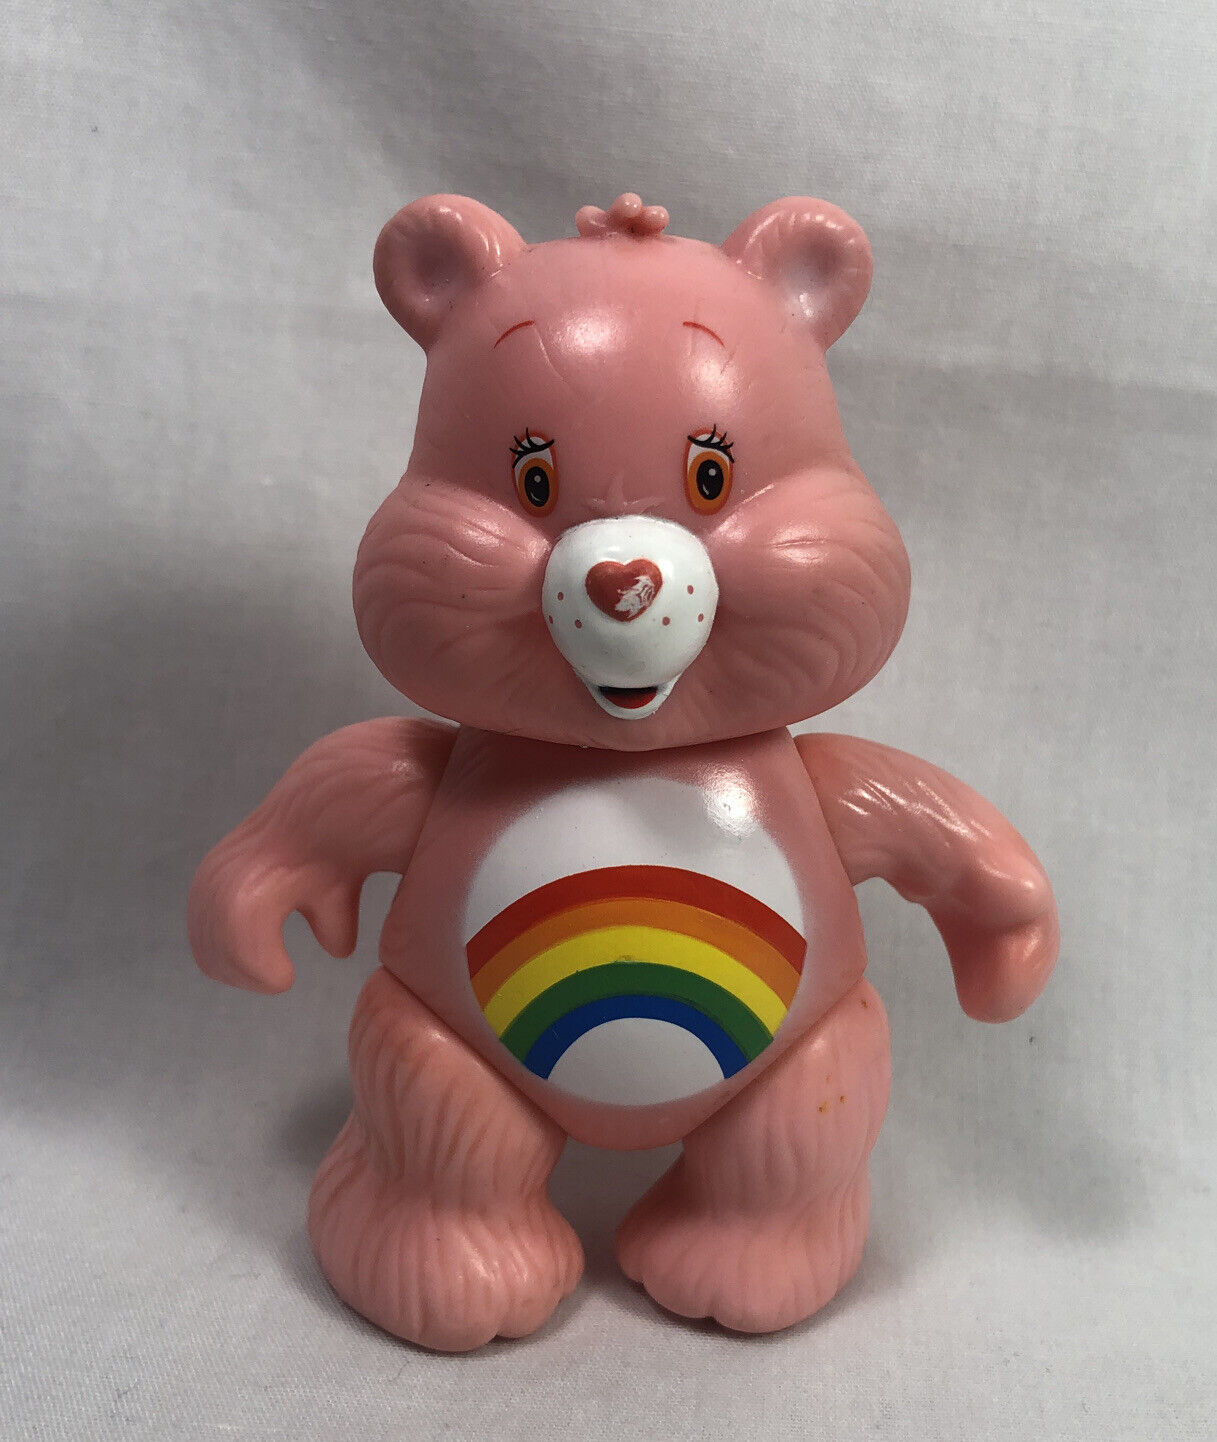 2003 Play Along Care Bears Cheer Bear Poseable Collectable Figure 3”